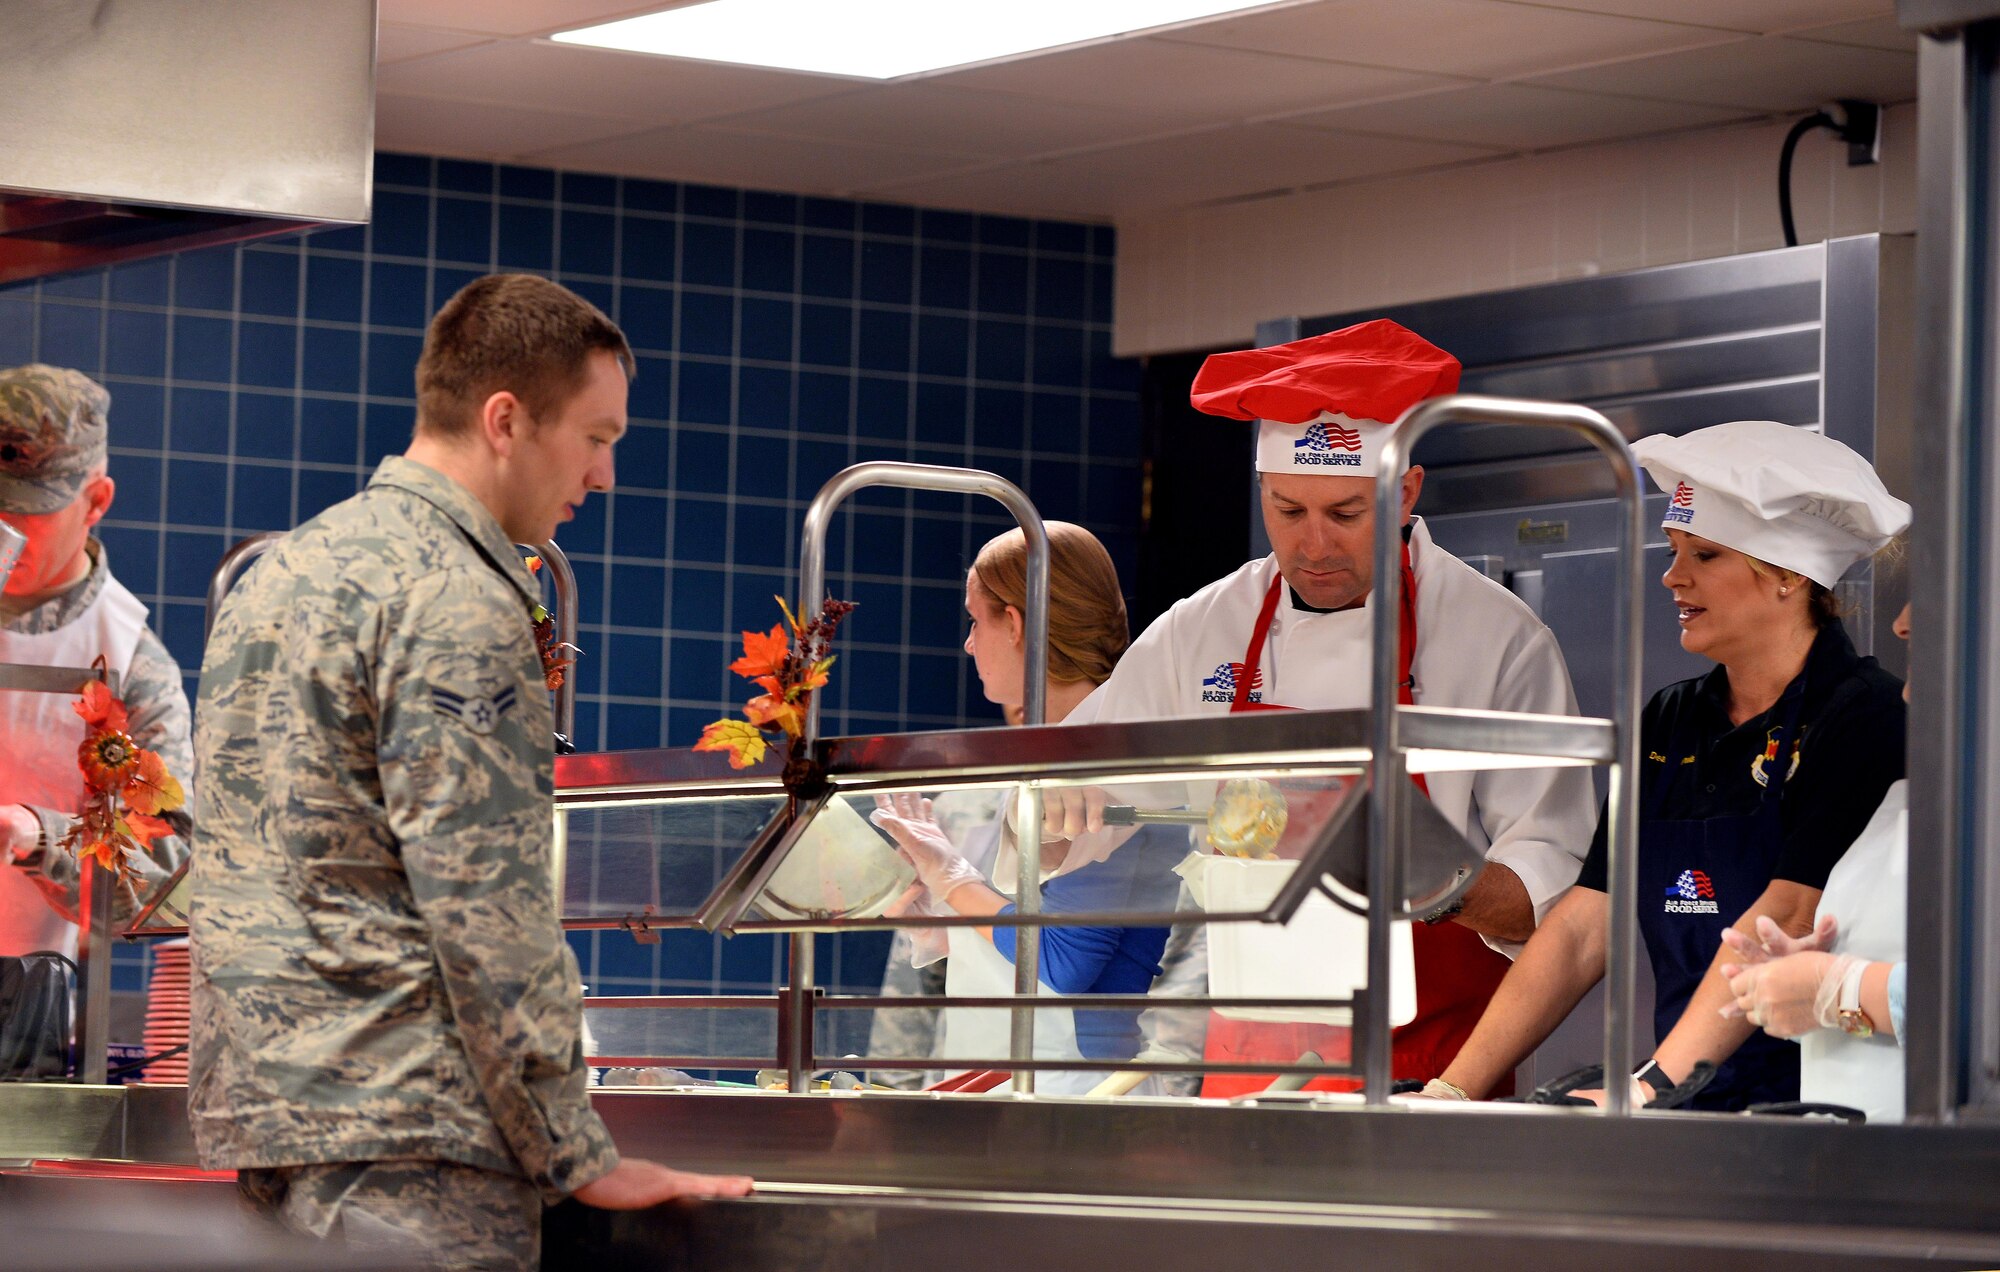 Col. Marty Reynolds, 55th Wing commander, along with his wife, Deanna help to serve Airmen Thanksgiving dinner at the Ronald L. King Dining Facility, Nov. 24, Offutt Air Force Base, Neb.  Wing and U.S. Strategic Command leadership and their families spent Thanksgiving afternoon greeting Airmen who celebrated the holiday on base.  (U.S. Air Force photo by Josh Plueger)